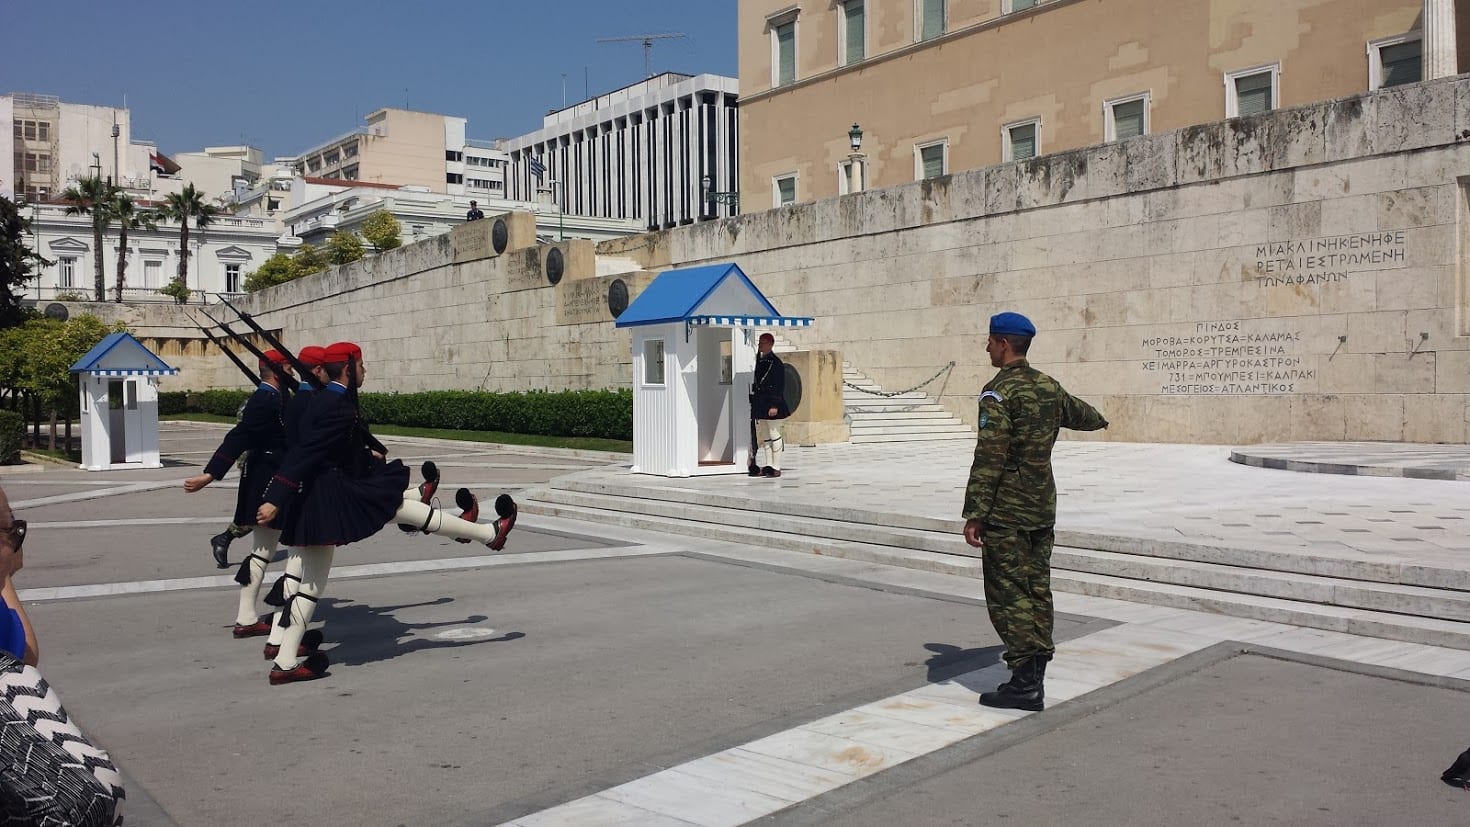 Evzones changing of the guards in athens